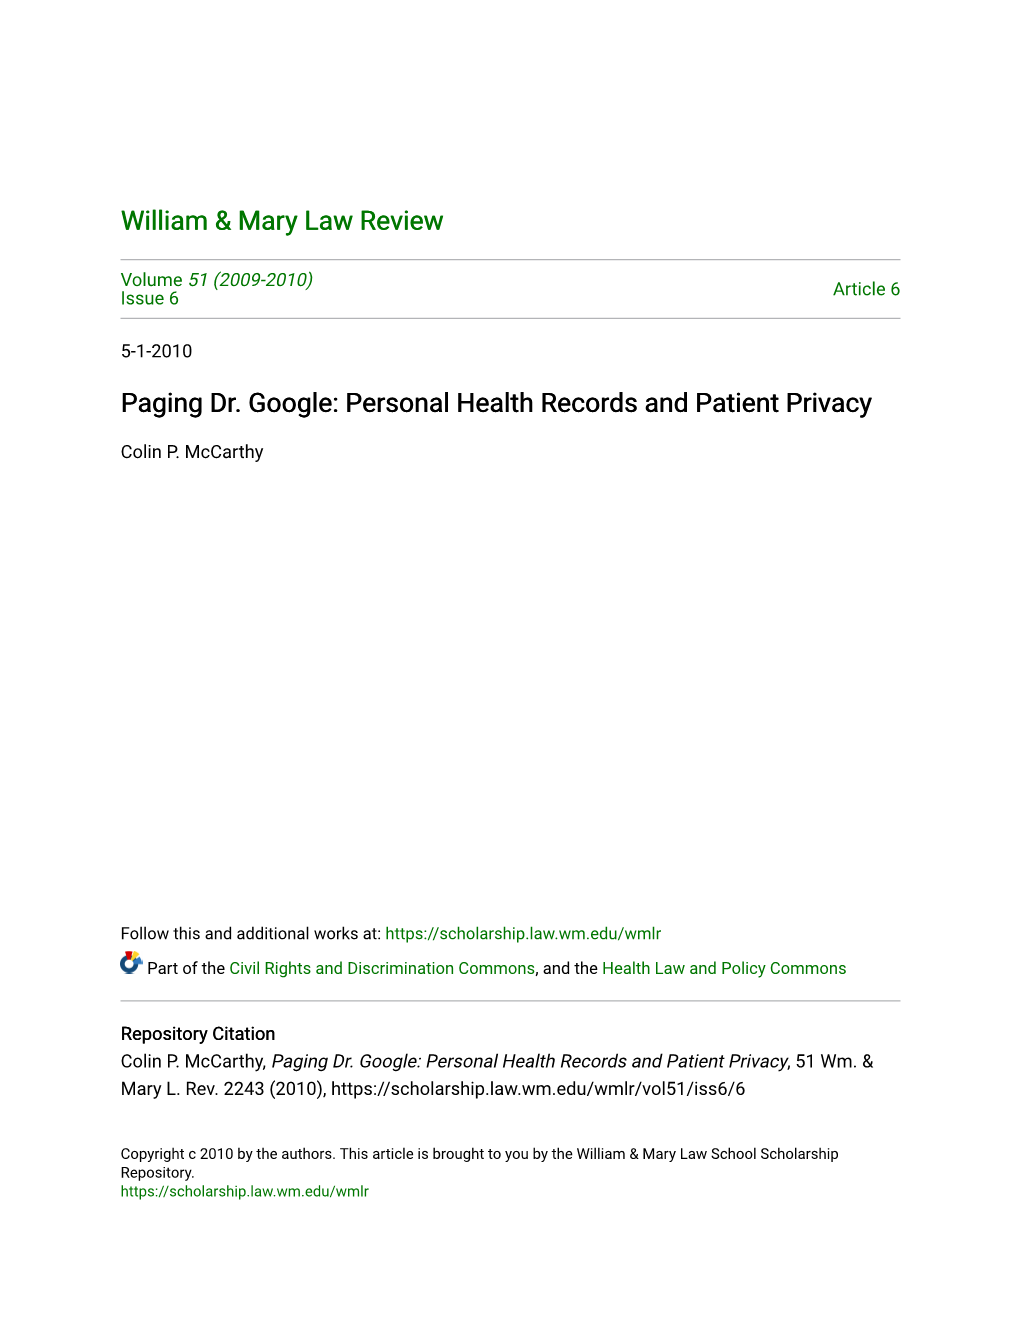 Paging Dr. Google: Personal Health Records and Patient Privacy